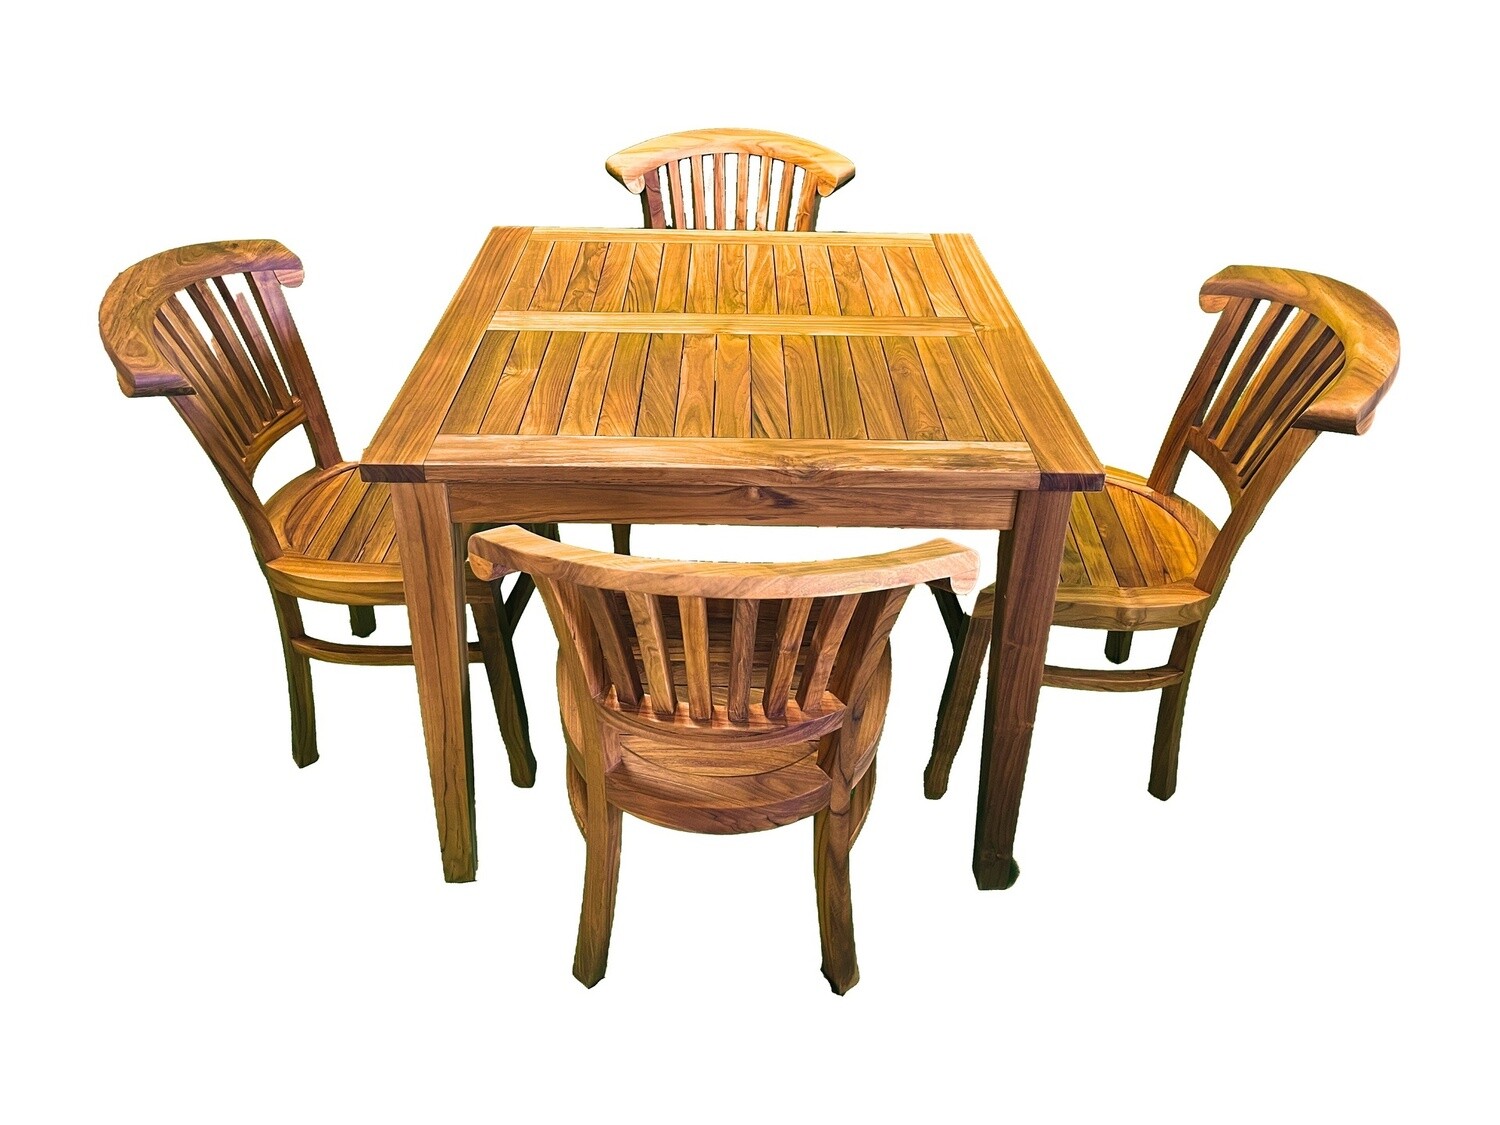 Teak Dining Set - 36" Square Table & 4 Chairs